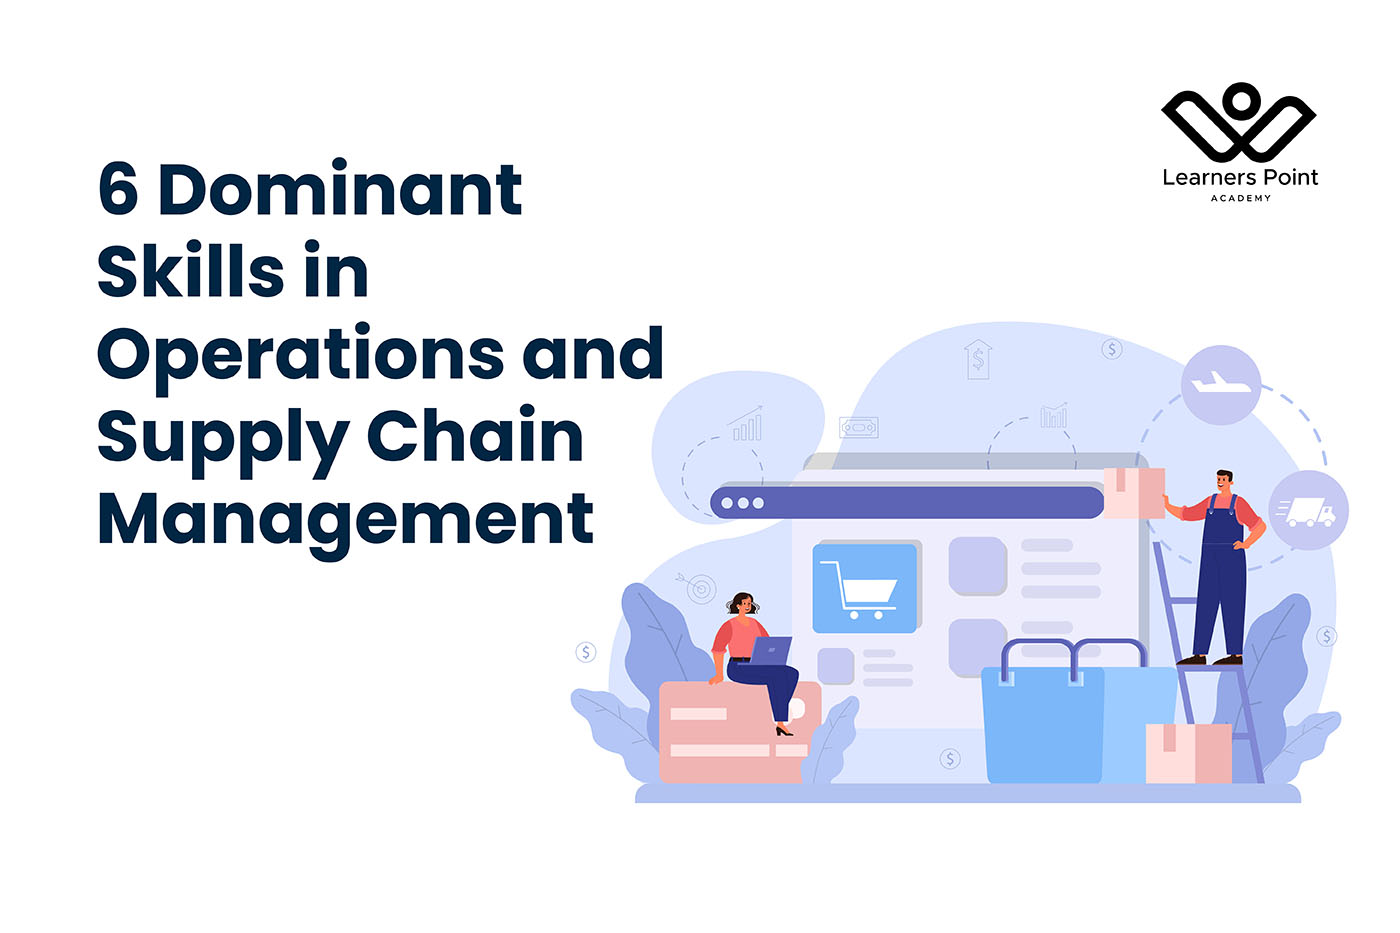 6 Dominant Skills in Operations and Supply Chain Management